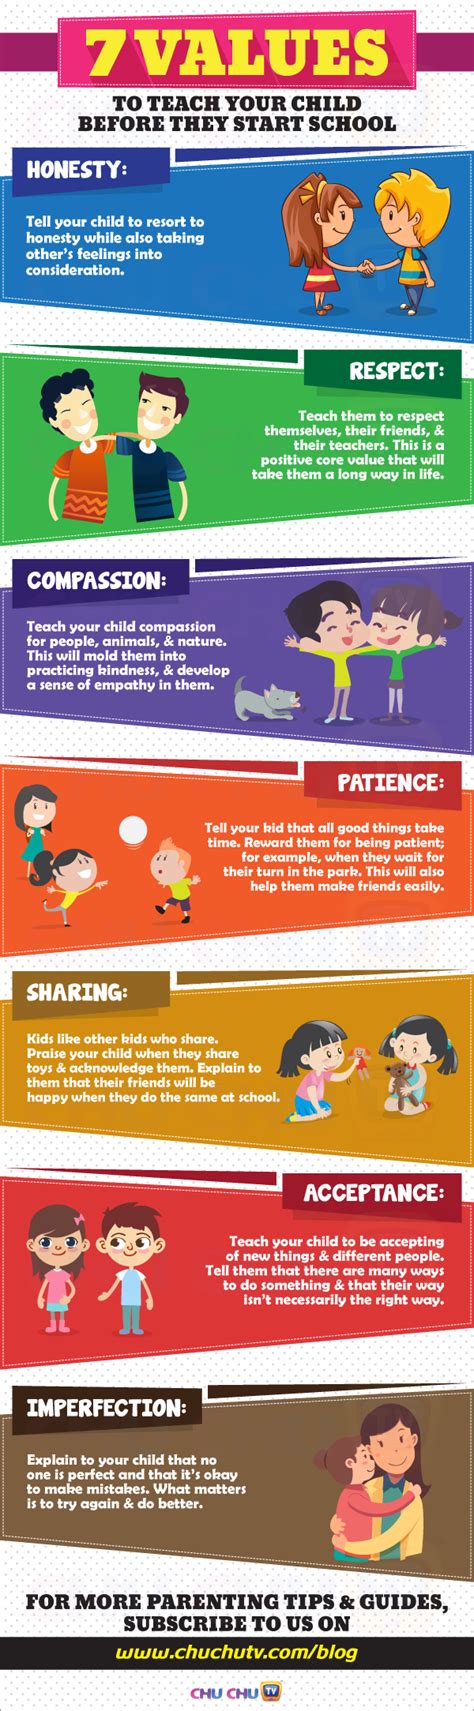 7 Values To Teach Your Child Before They Start School